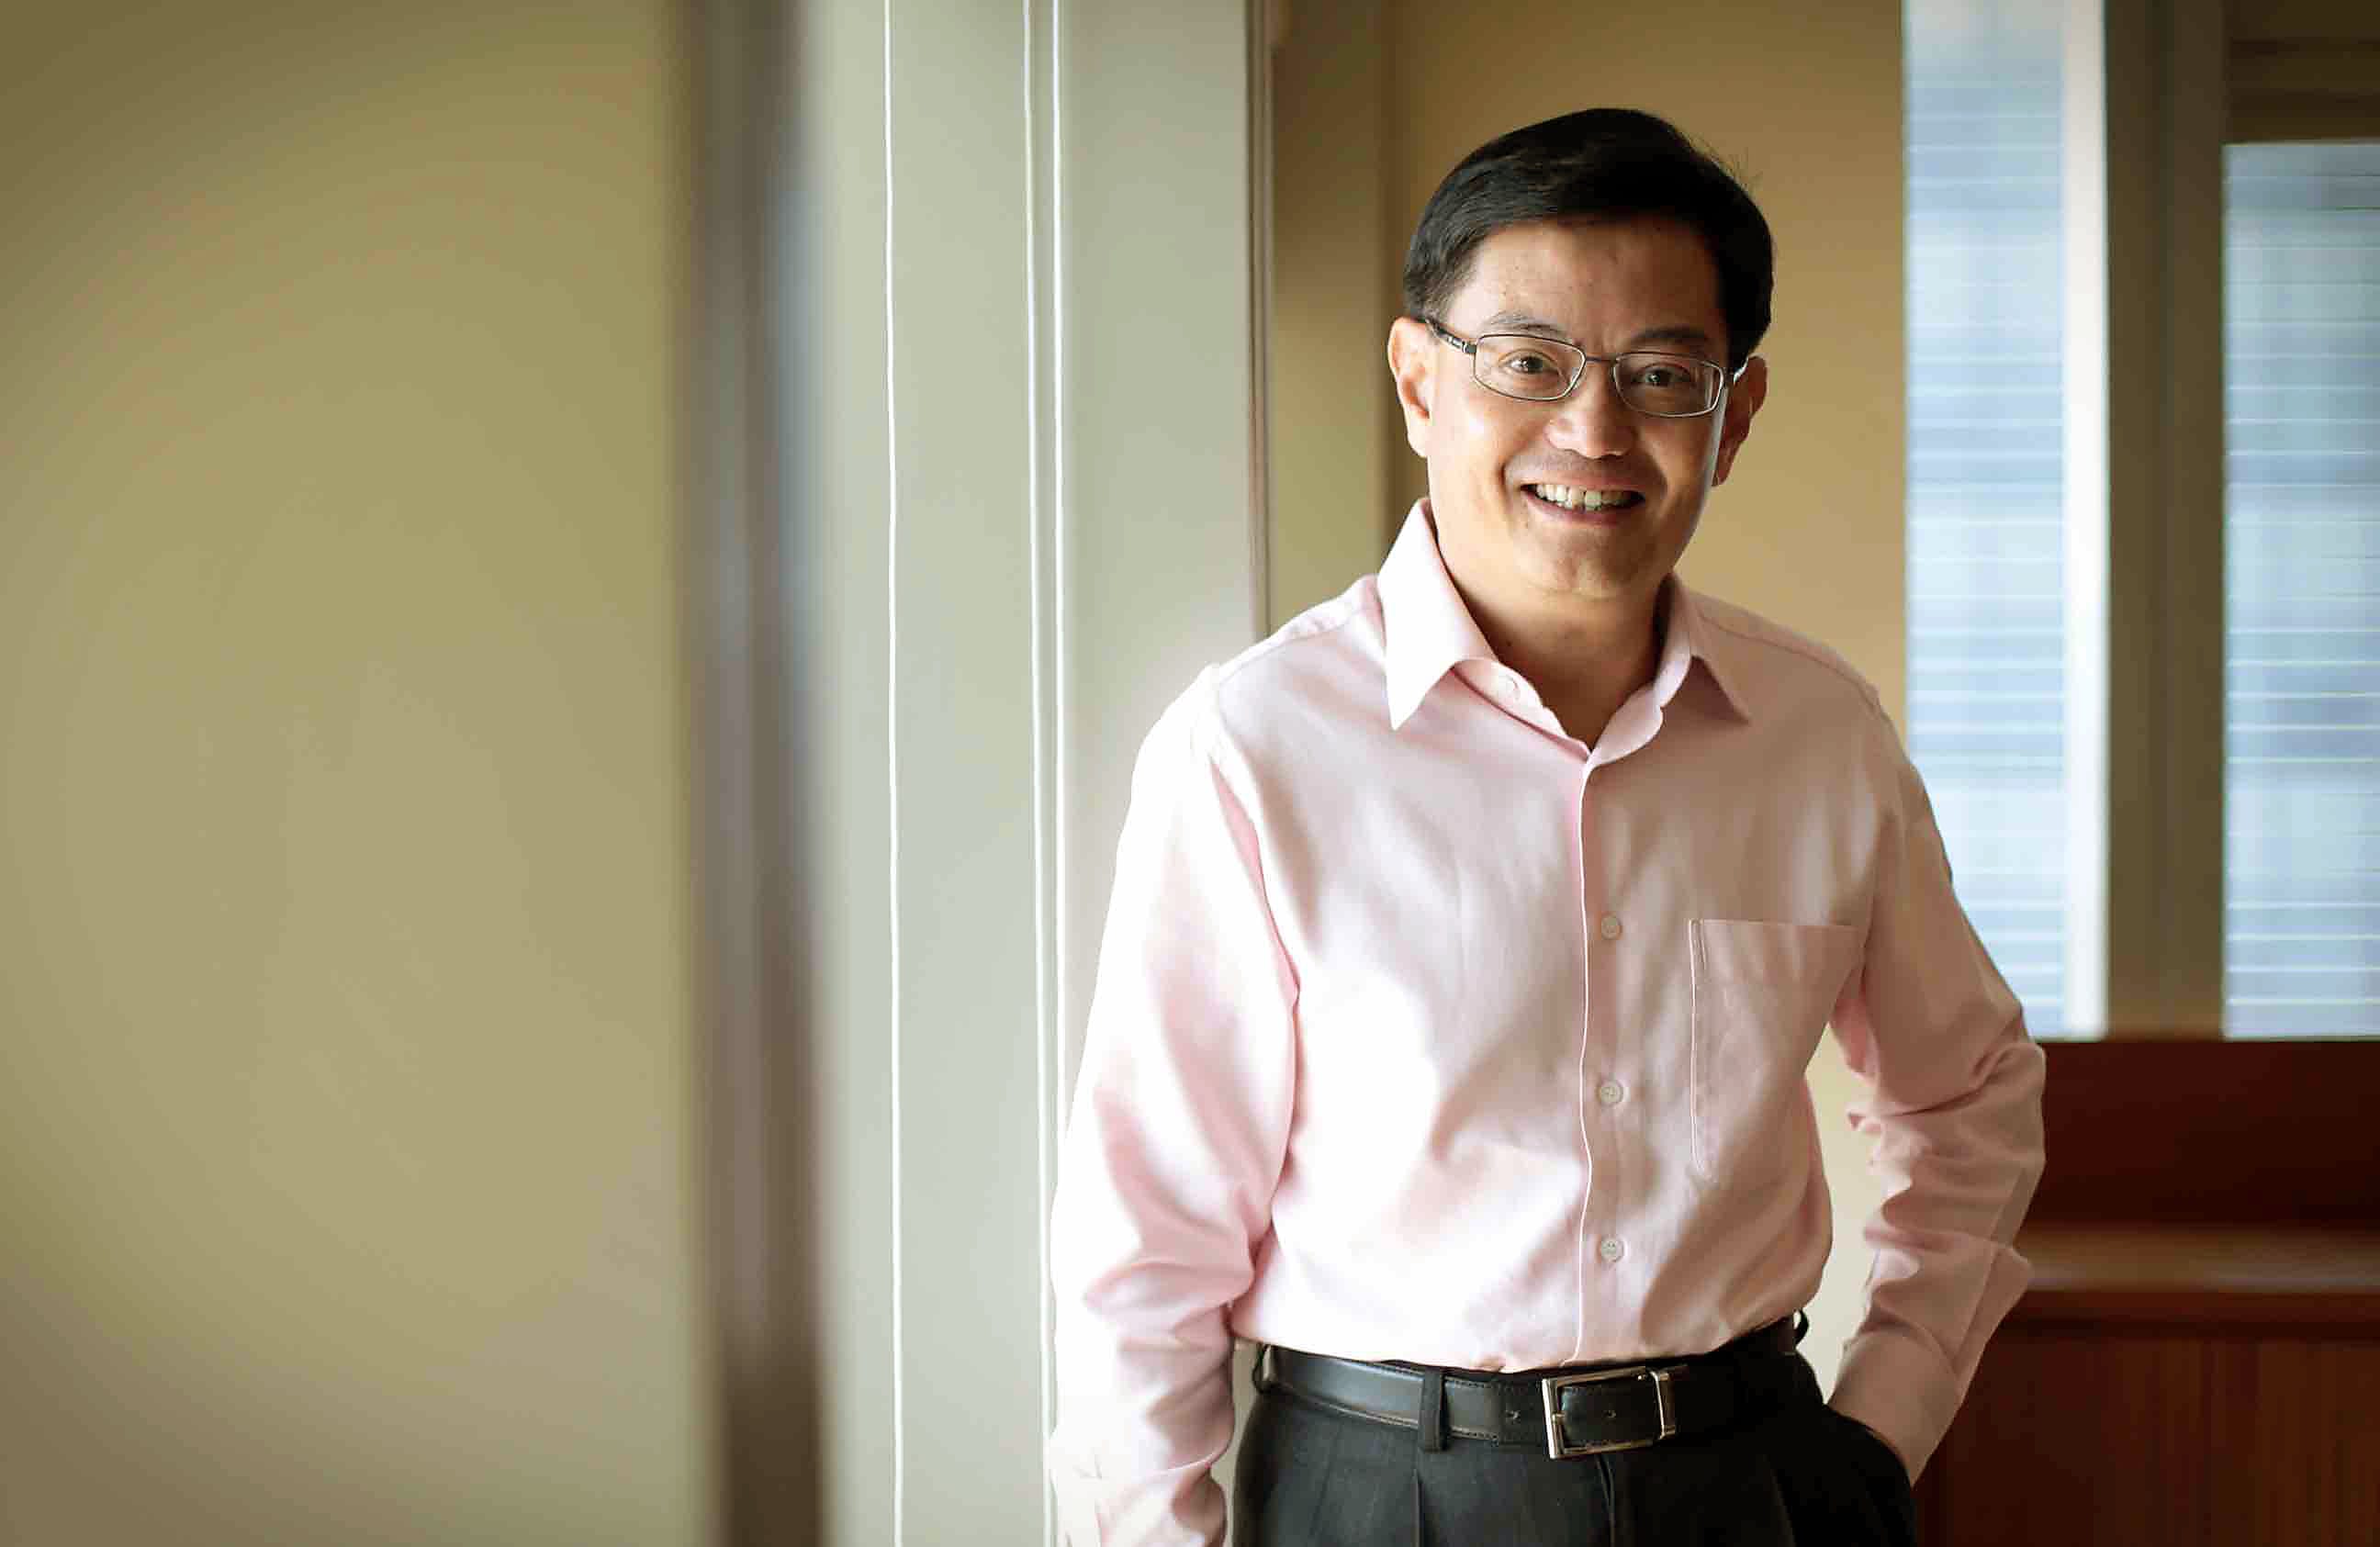 All eyes are on Finance Minister Heng Swee Keat, who will deliver his first-ever Budget.